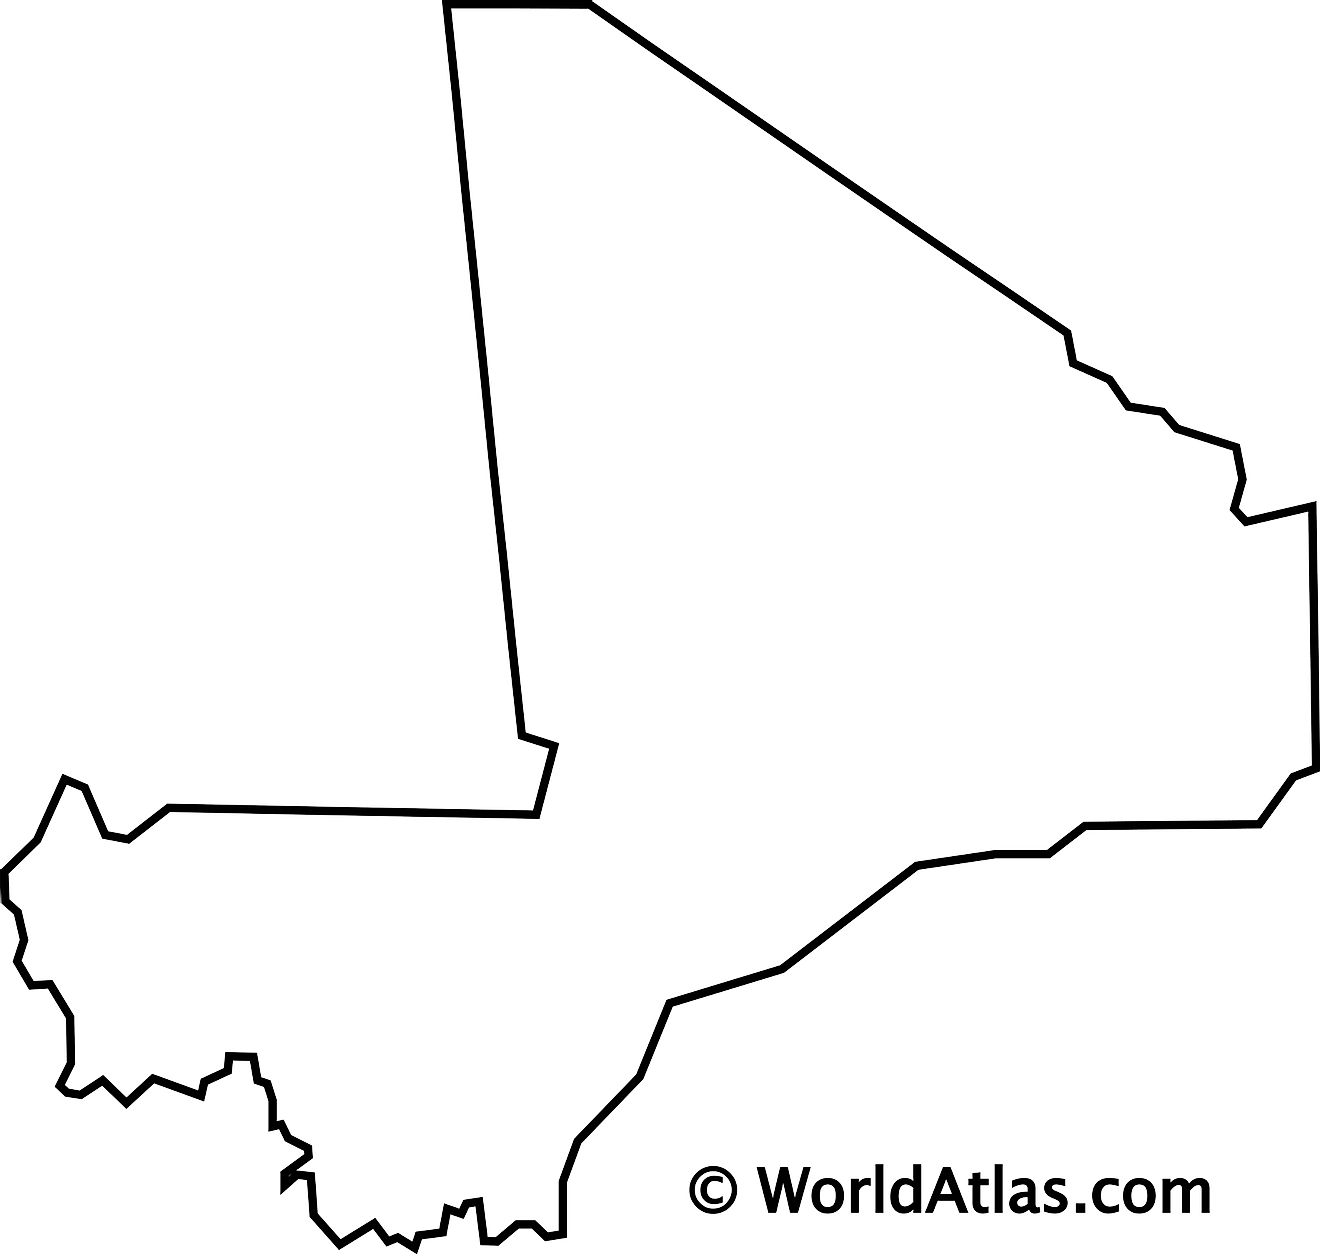 Blank Outline Map of Mali